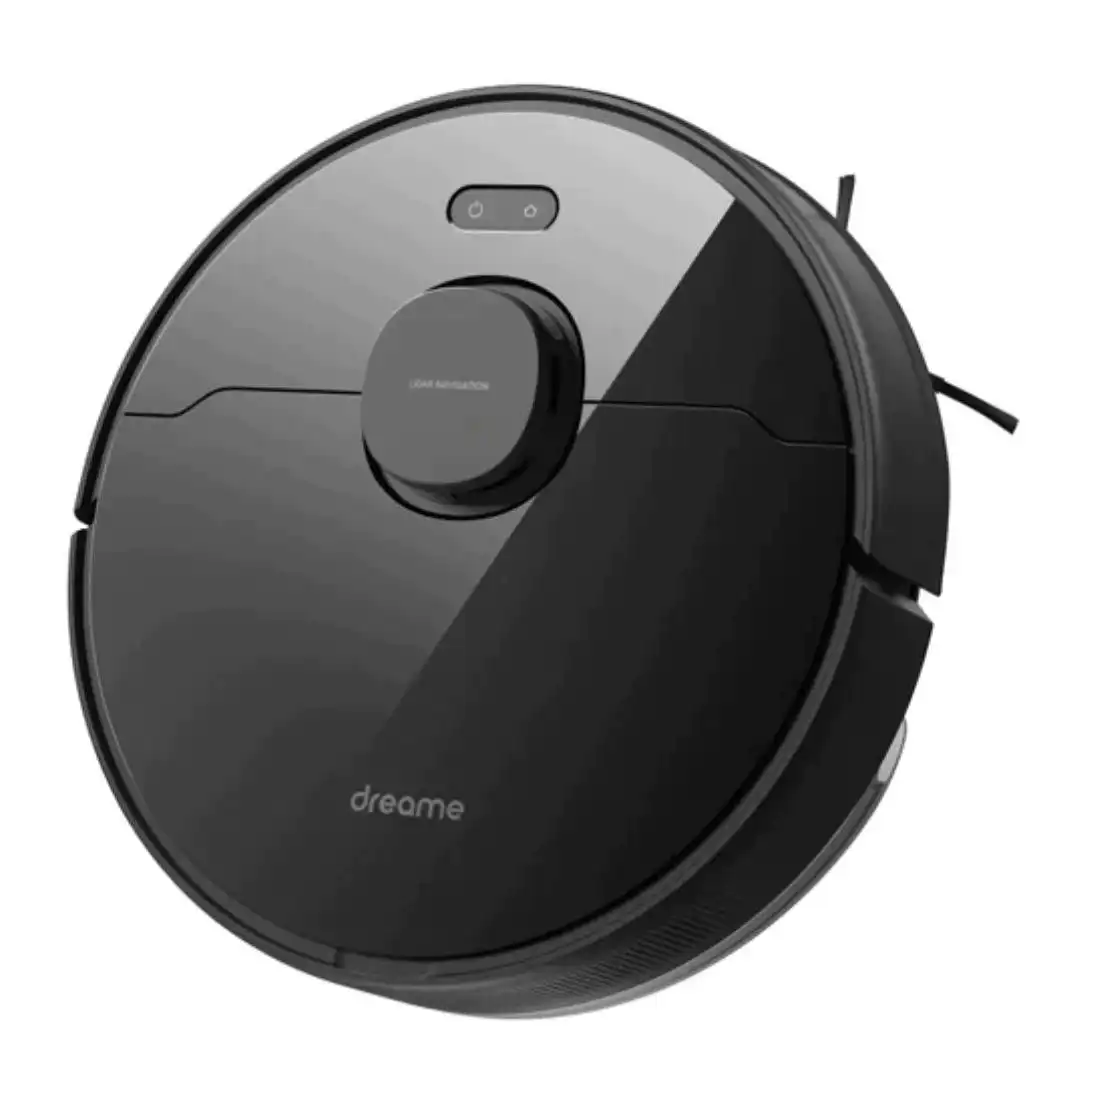 Dreame D9 Max Robot Vacuum and Mop Cleaner - Black